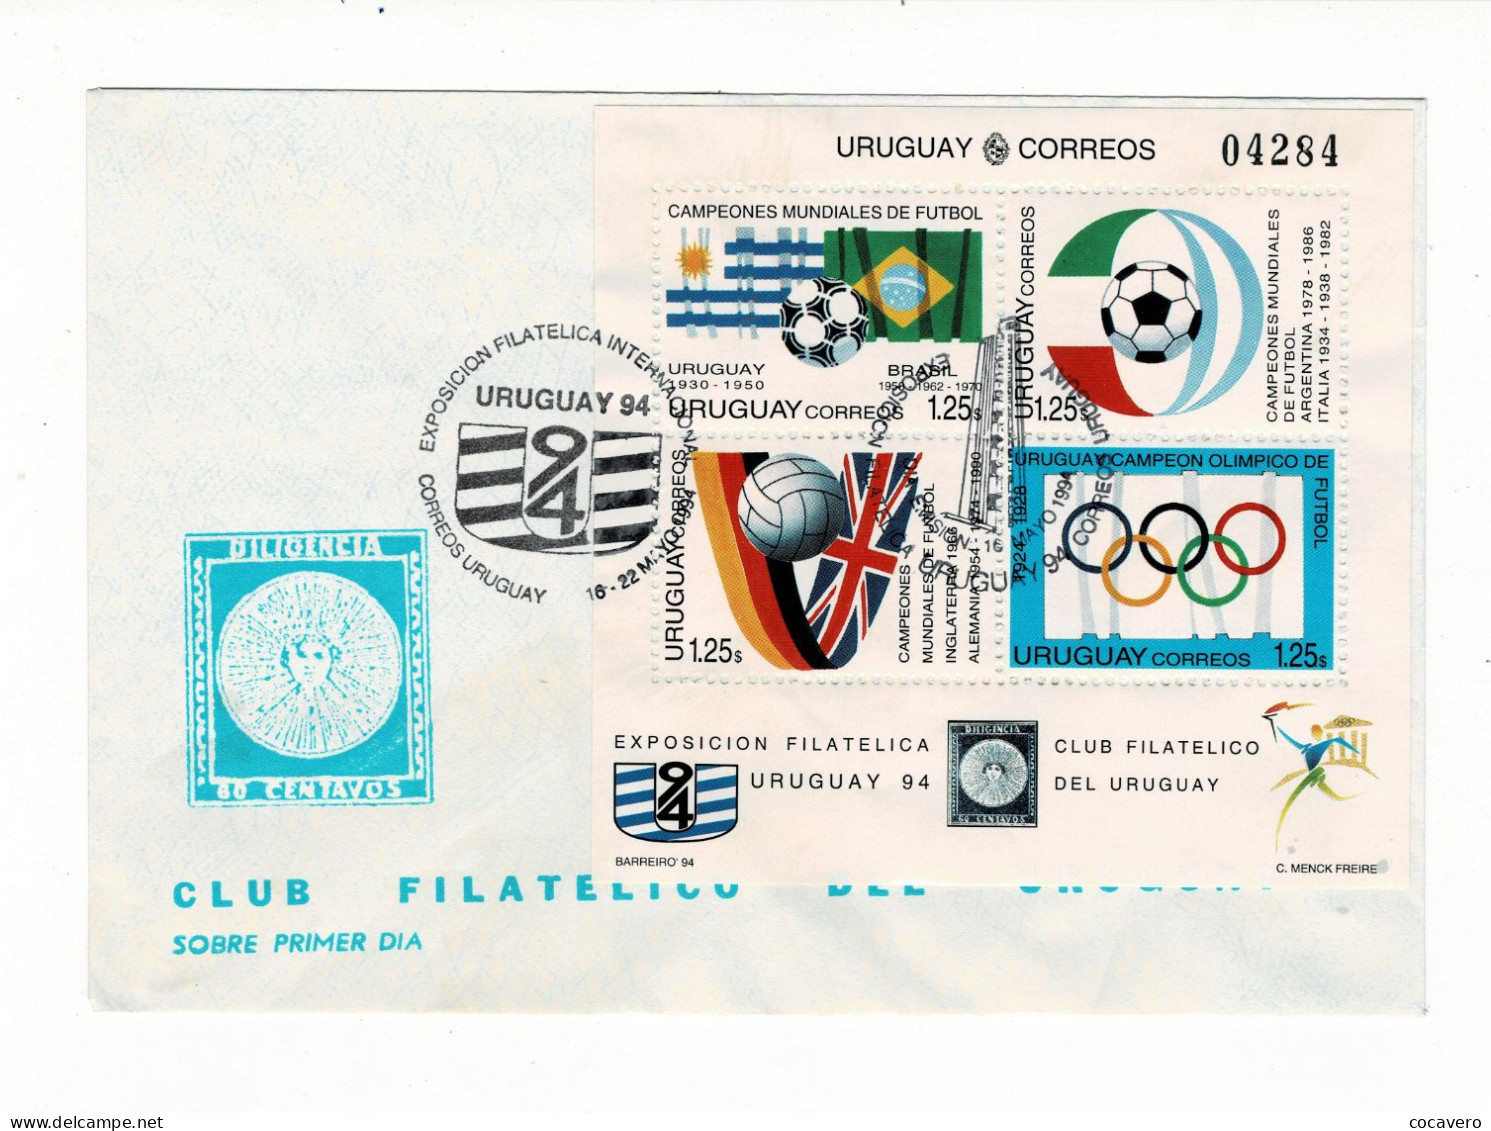 FUTBOL SOCCER WORLD CUP - BIG LOT 82 STAMPS, 16 SOUVENIRS, 3 ENVELOPES FROM 23 DIFFERENT COUNTRIES